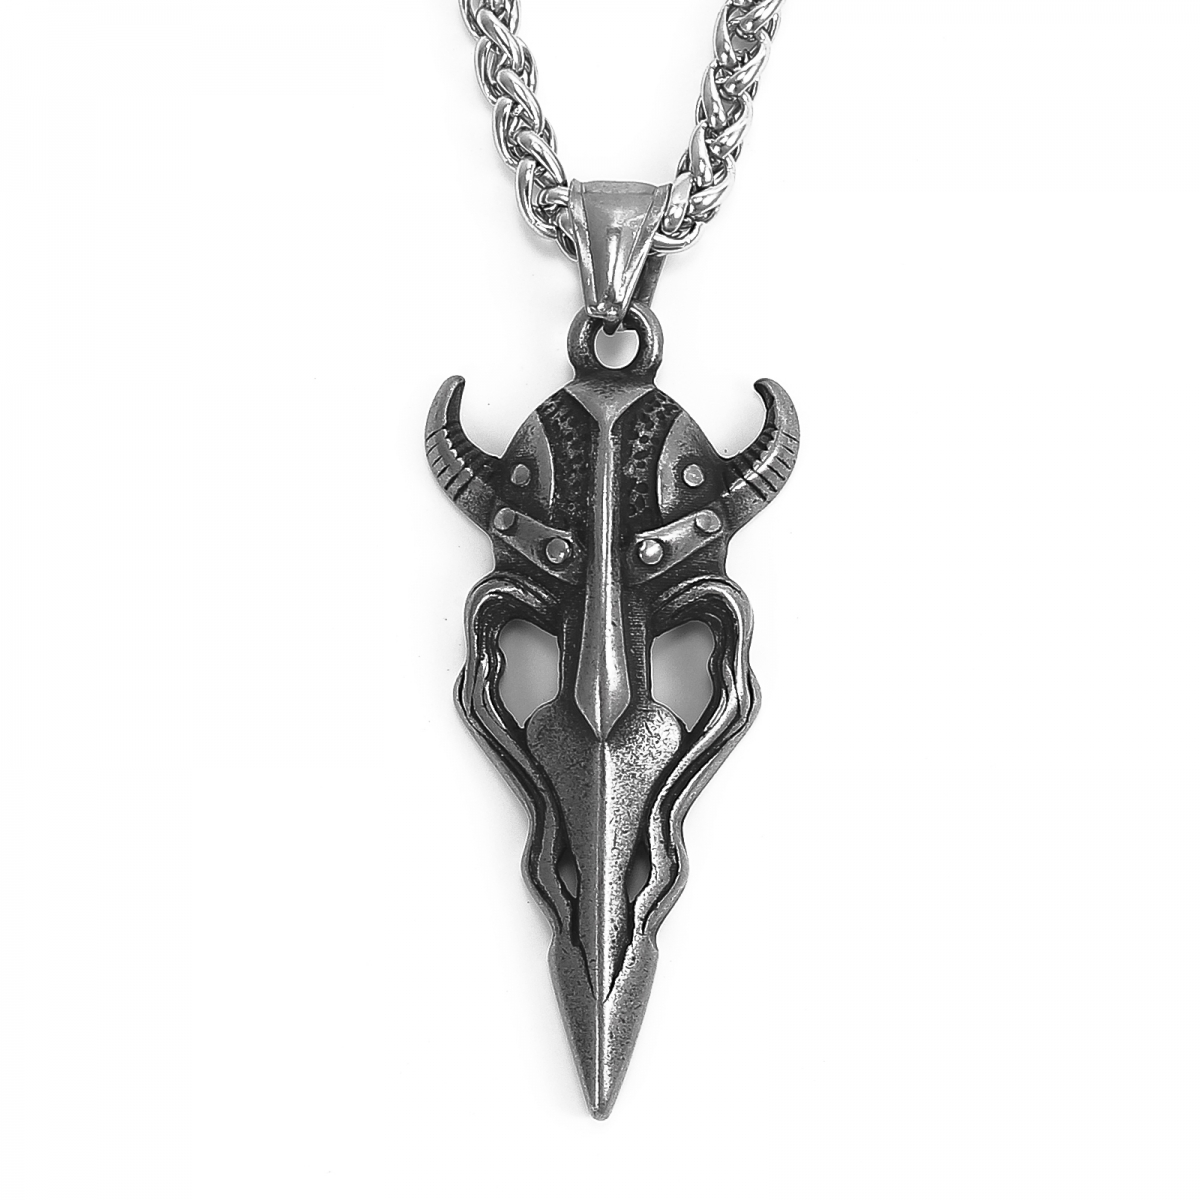 Viking Warrior Necklace US$2.9/PC-NORSECOLLECTION- Viking Jewelry,Viking Necklace,Viking Bracelet,Viking Rings,Viking Mugs,Viking Accessories,Viking Crafts